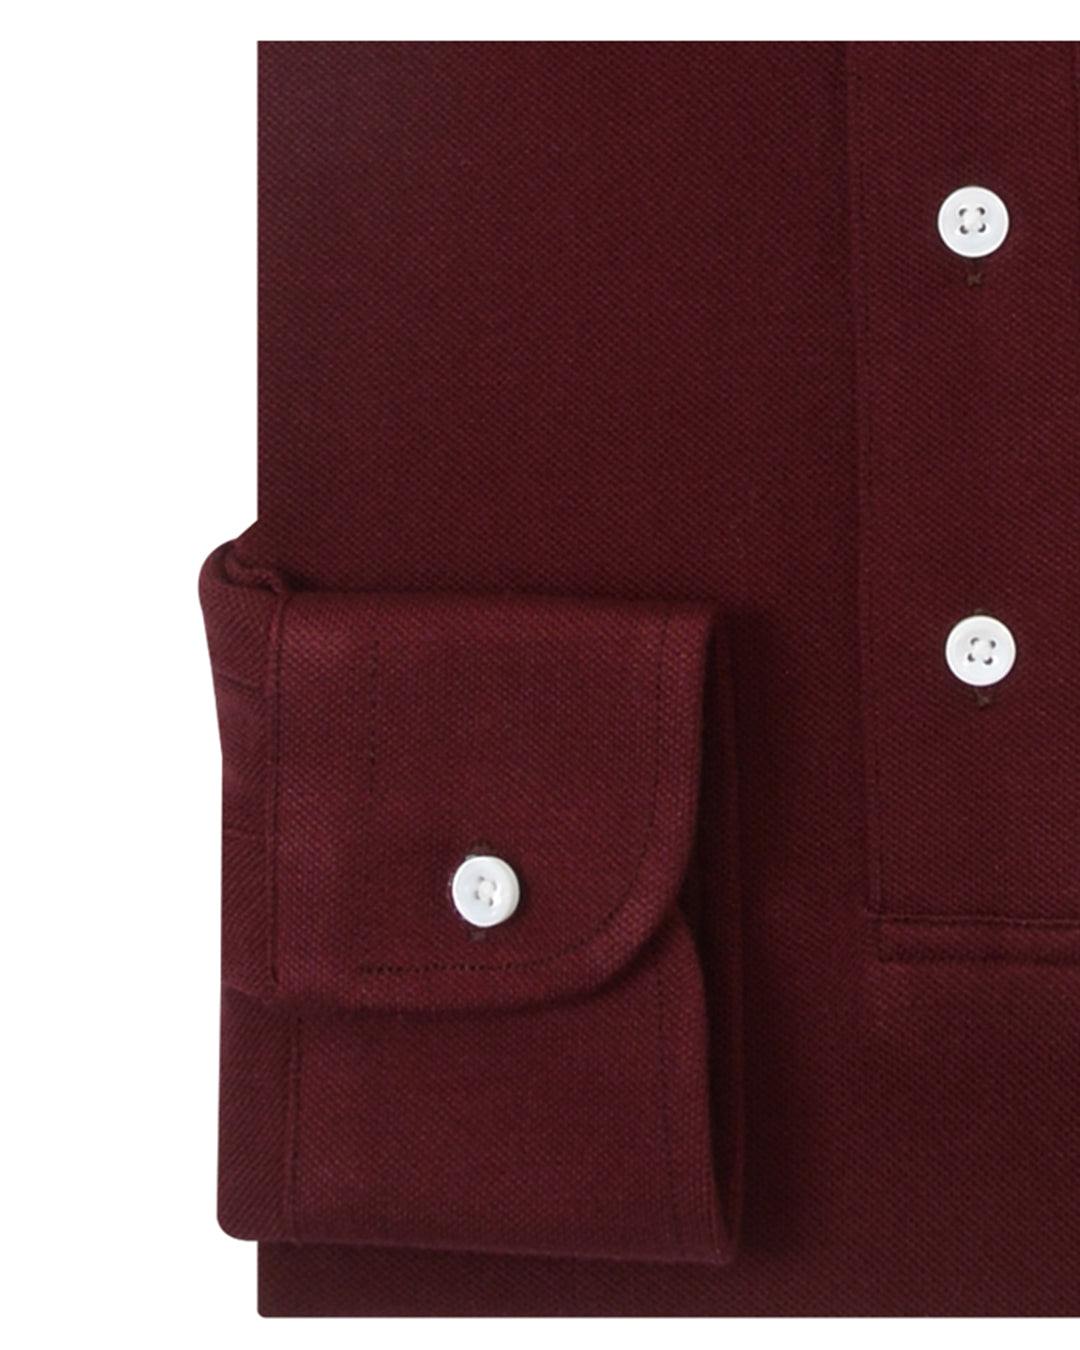 Cuff of the custom oxford polo shirt for men by Luxire in deep maroon